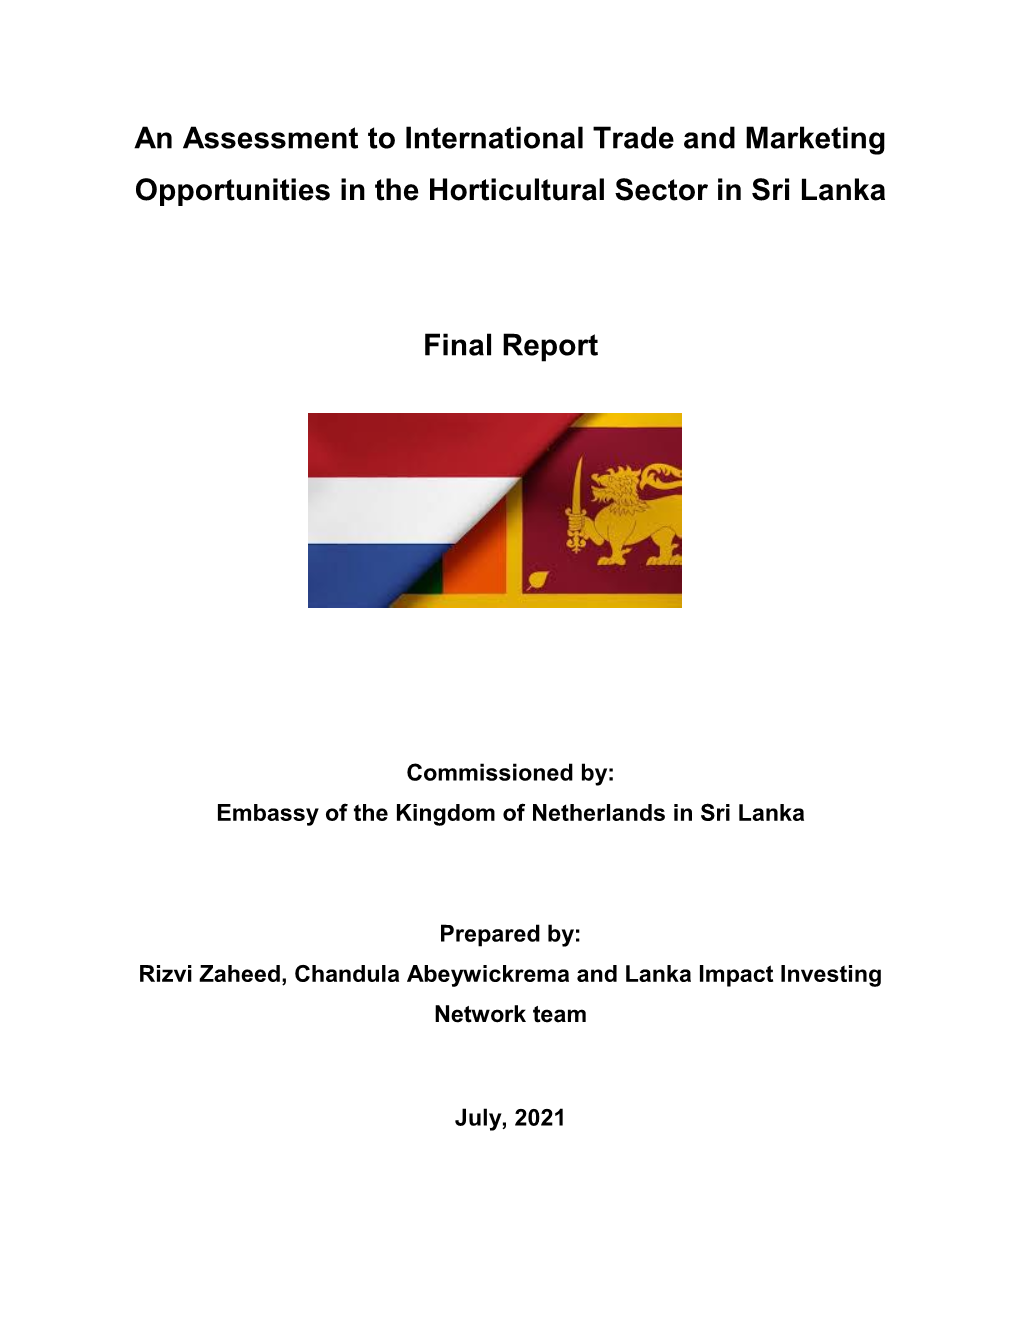 Opportunities in the Horticultural Sector in Sri Lanka